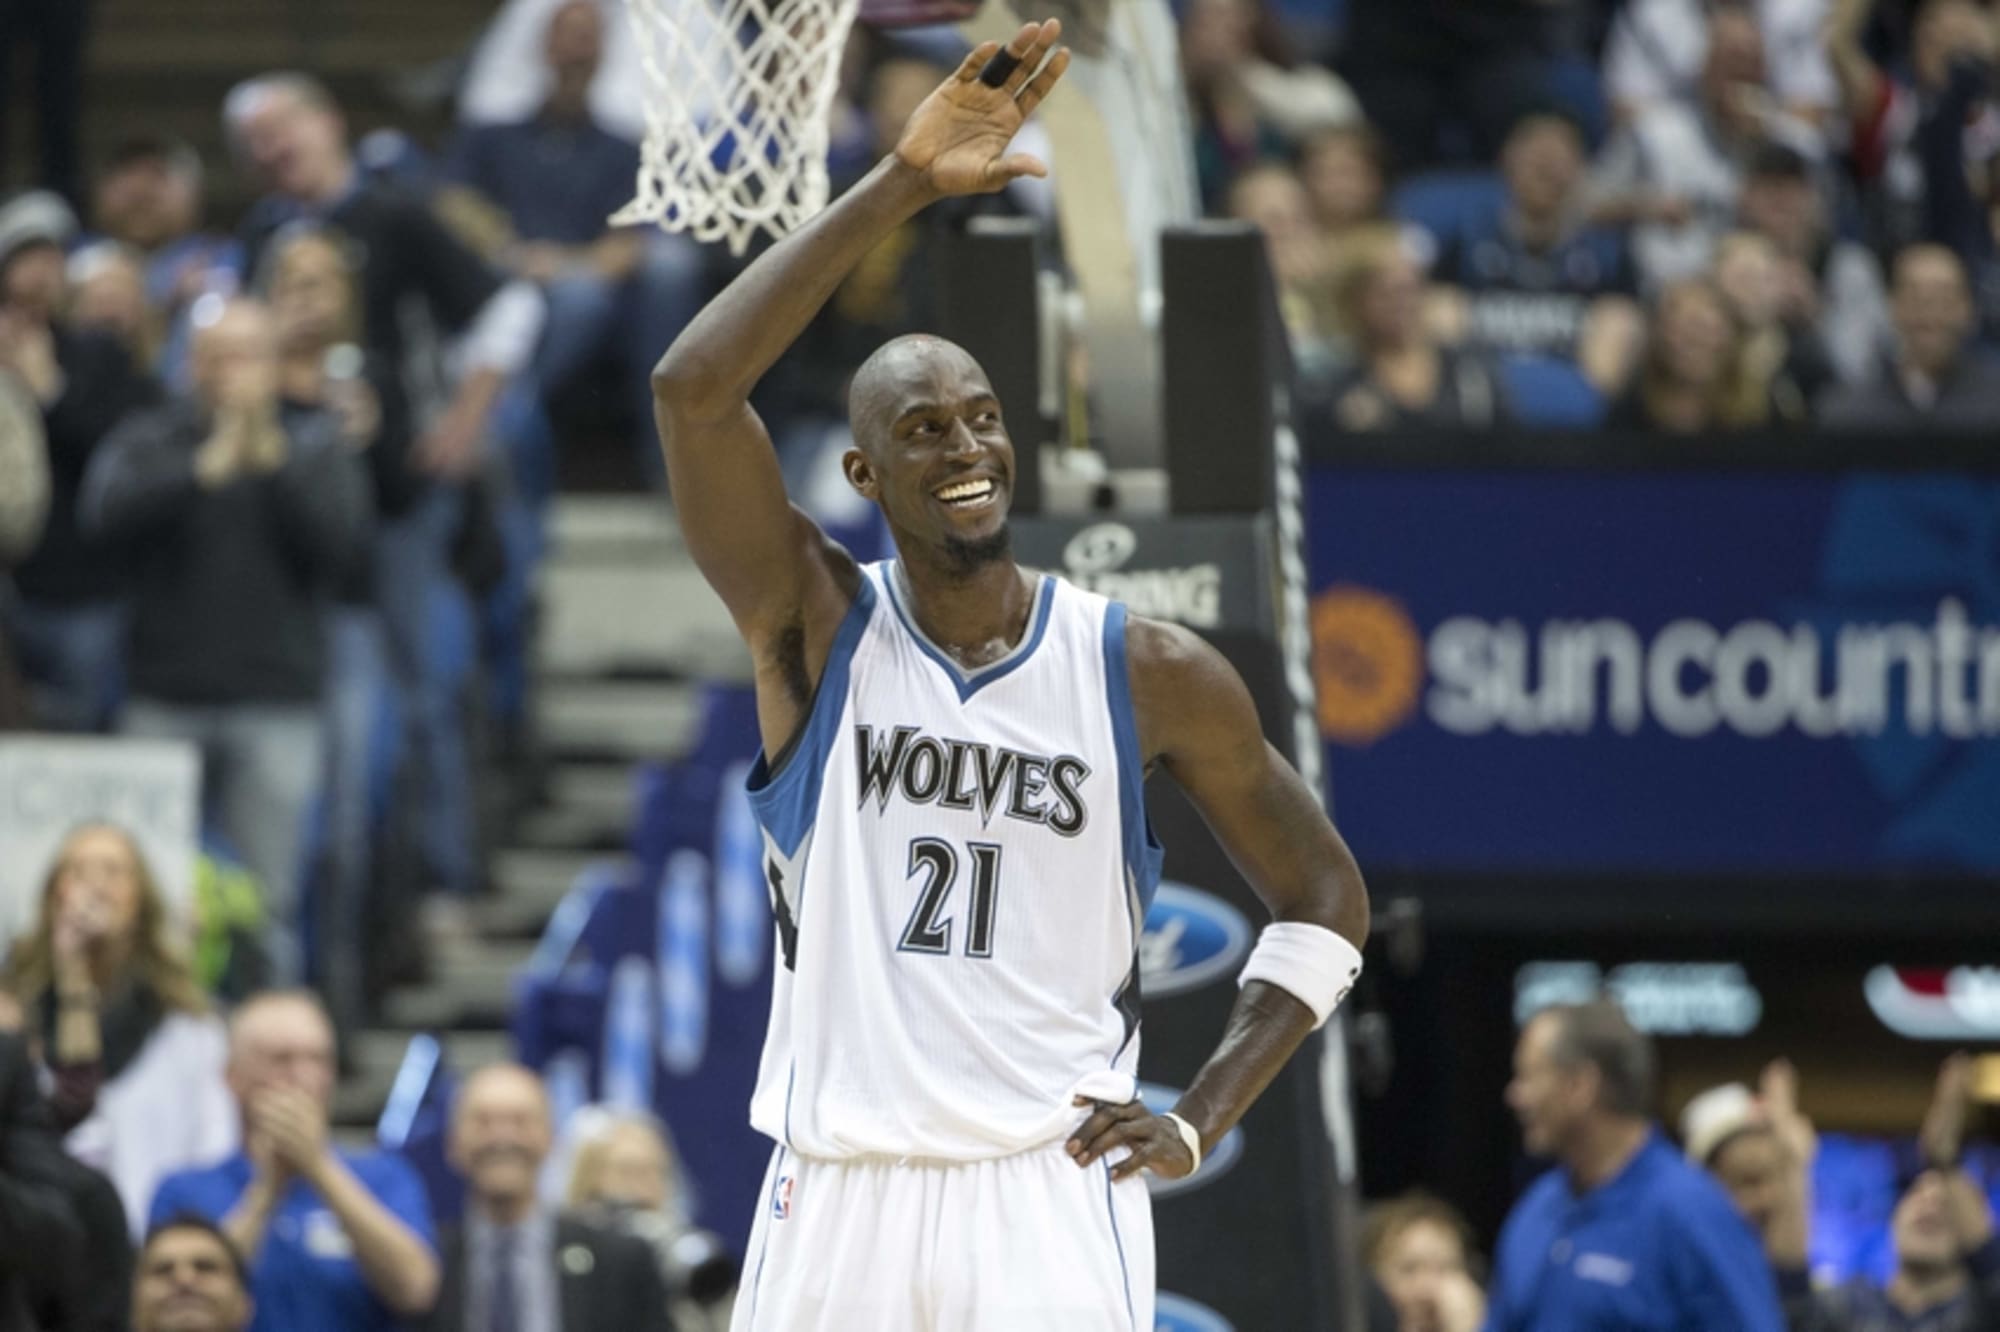 Kevin purchases 1,000 tickets for Timberwolves fans